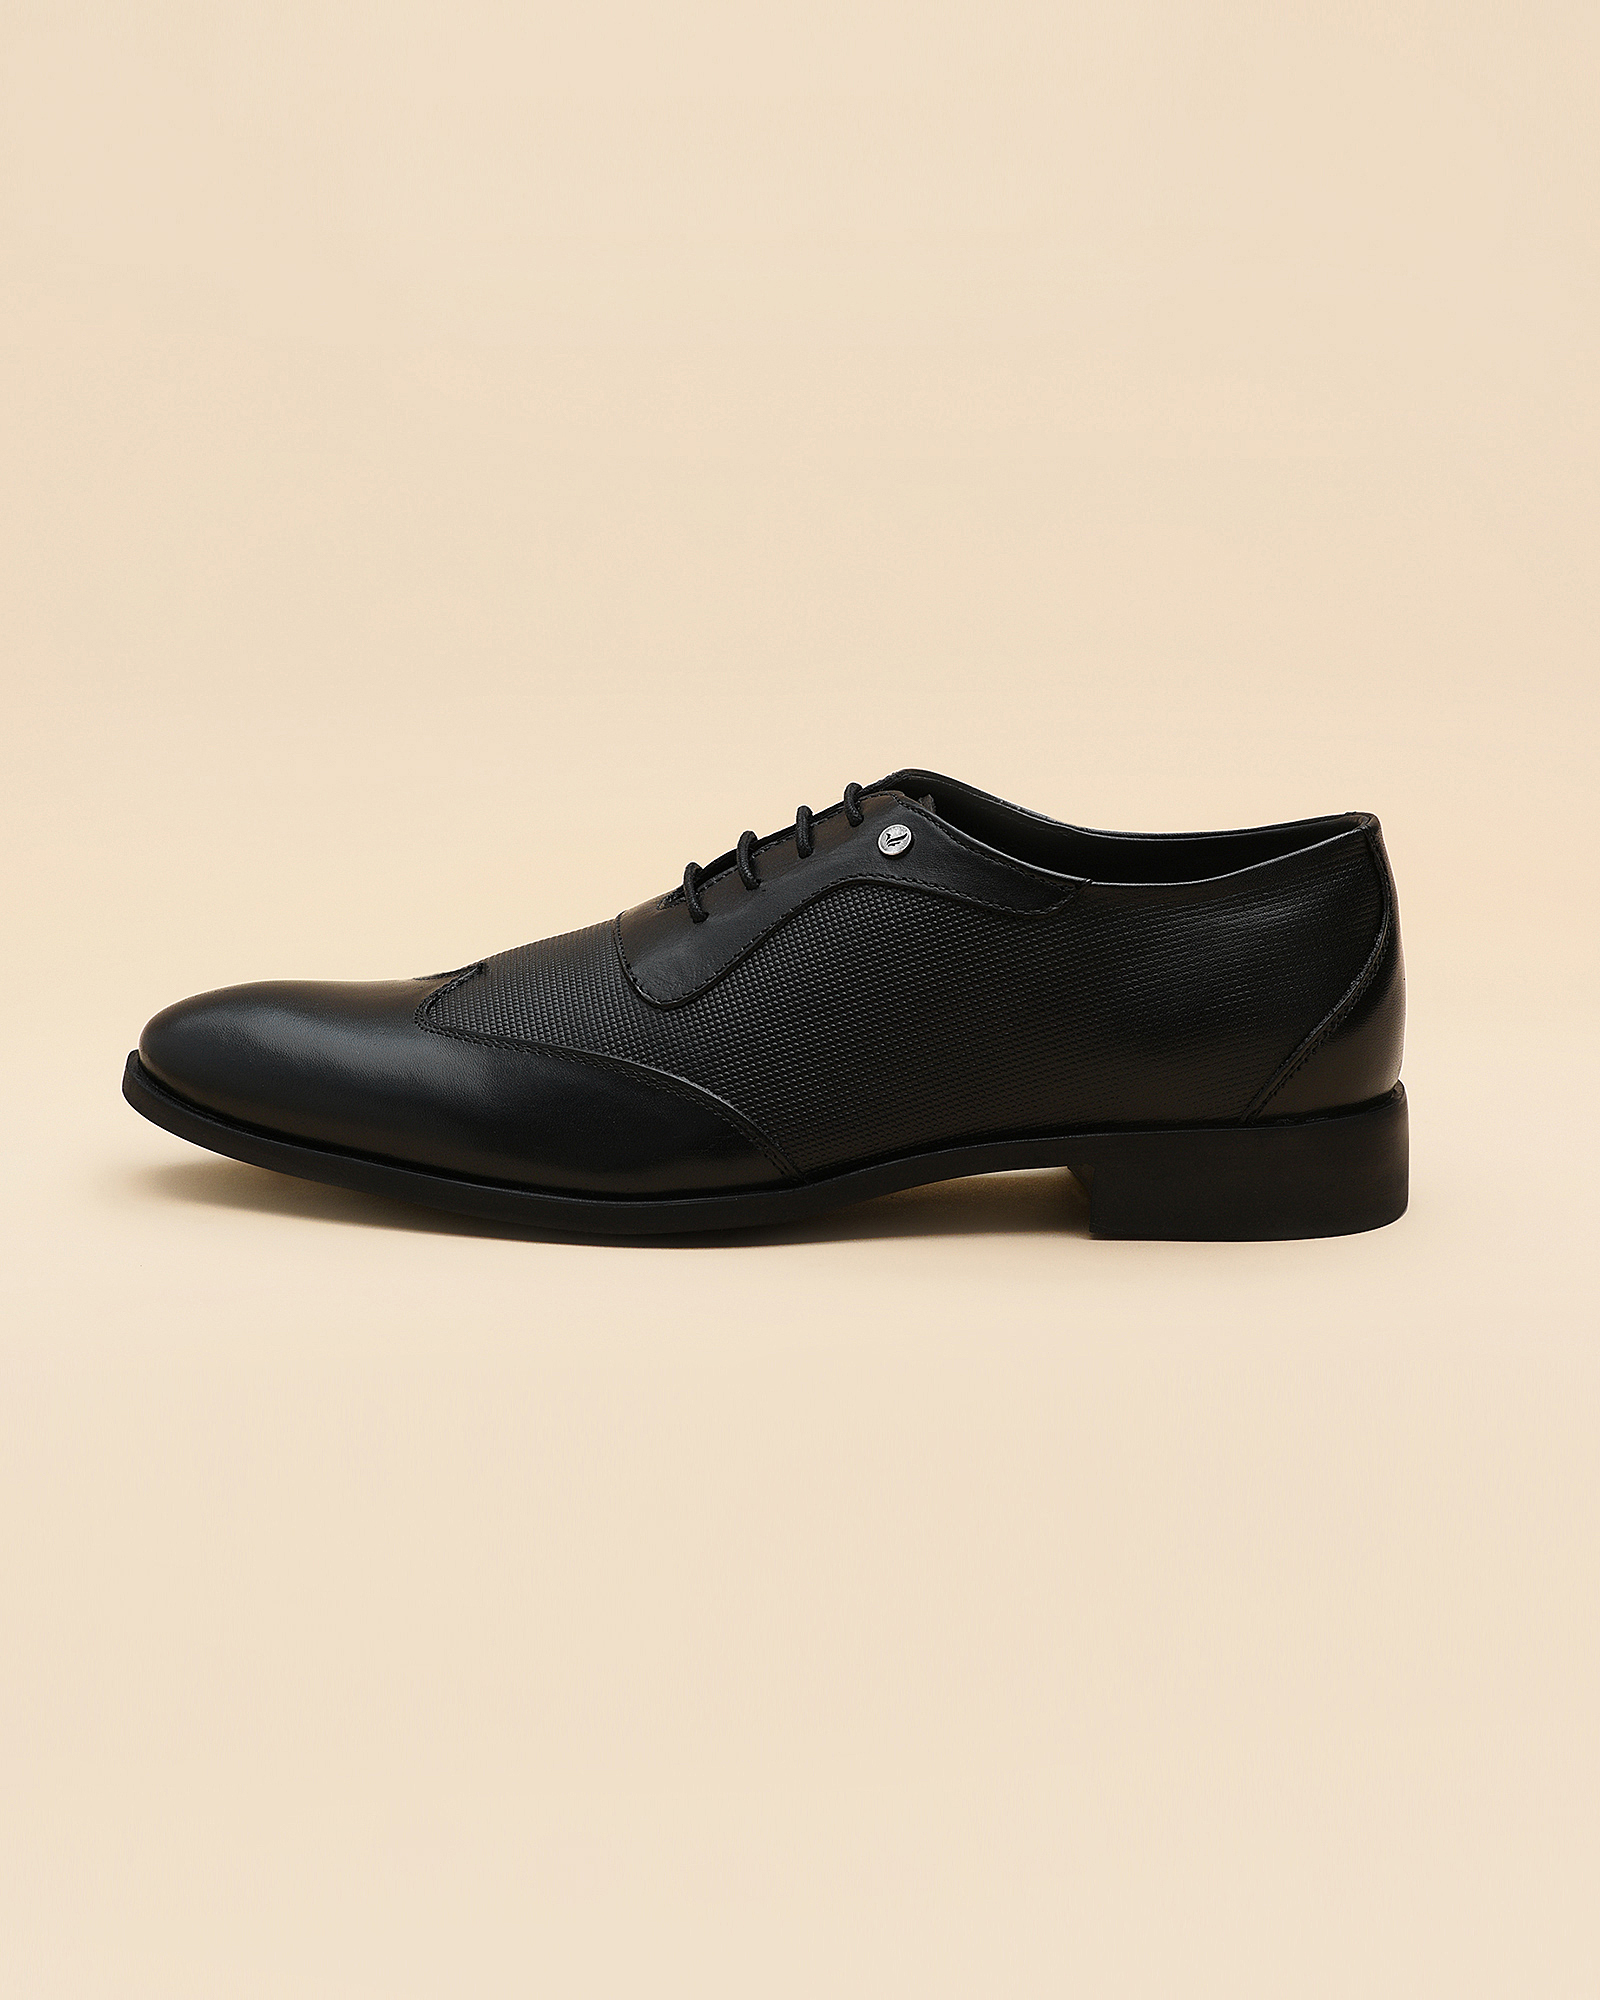 Black Oxford Leather shoes